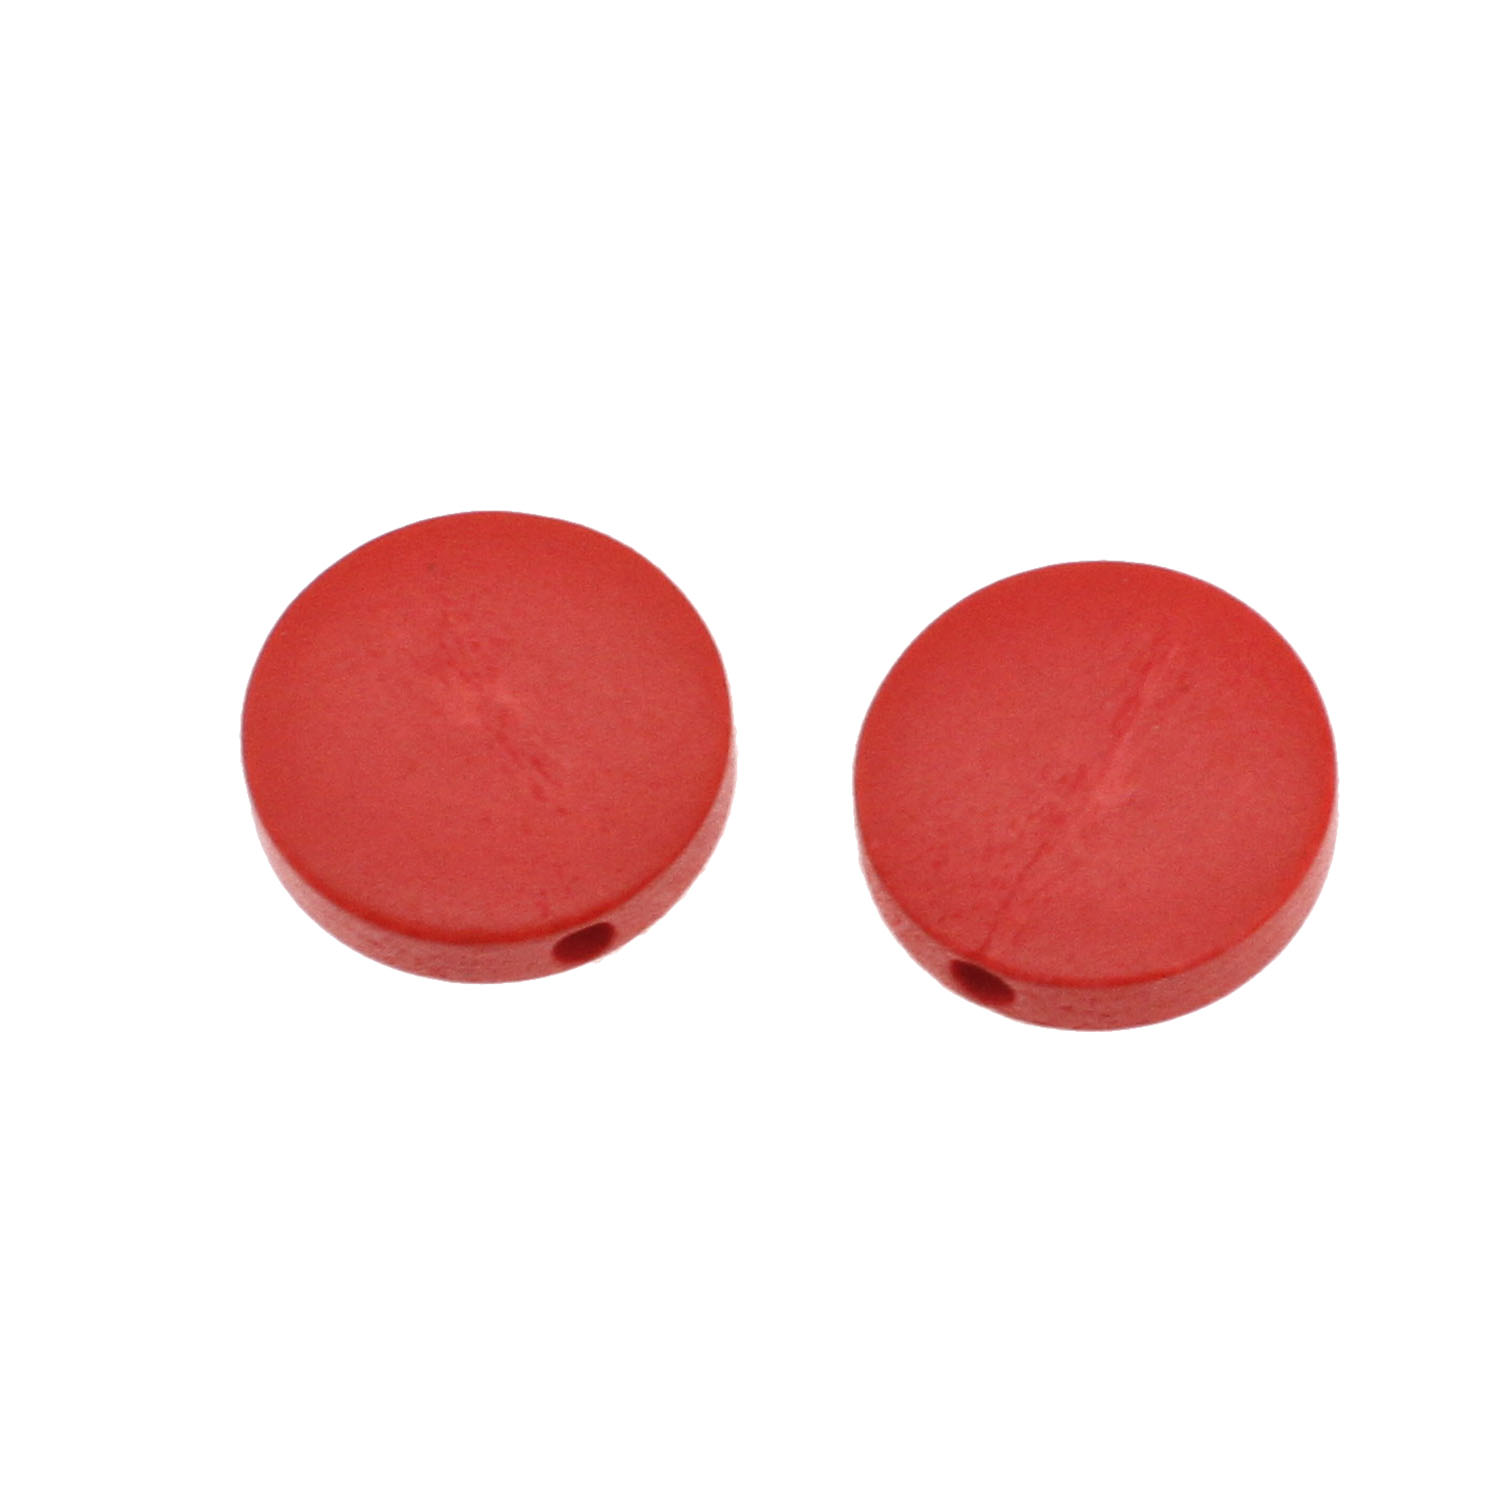 30 mm red